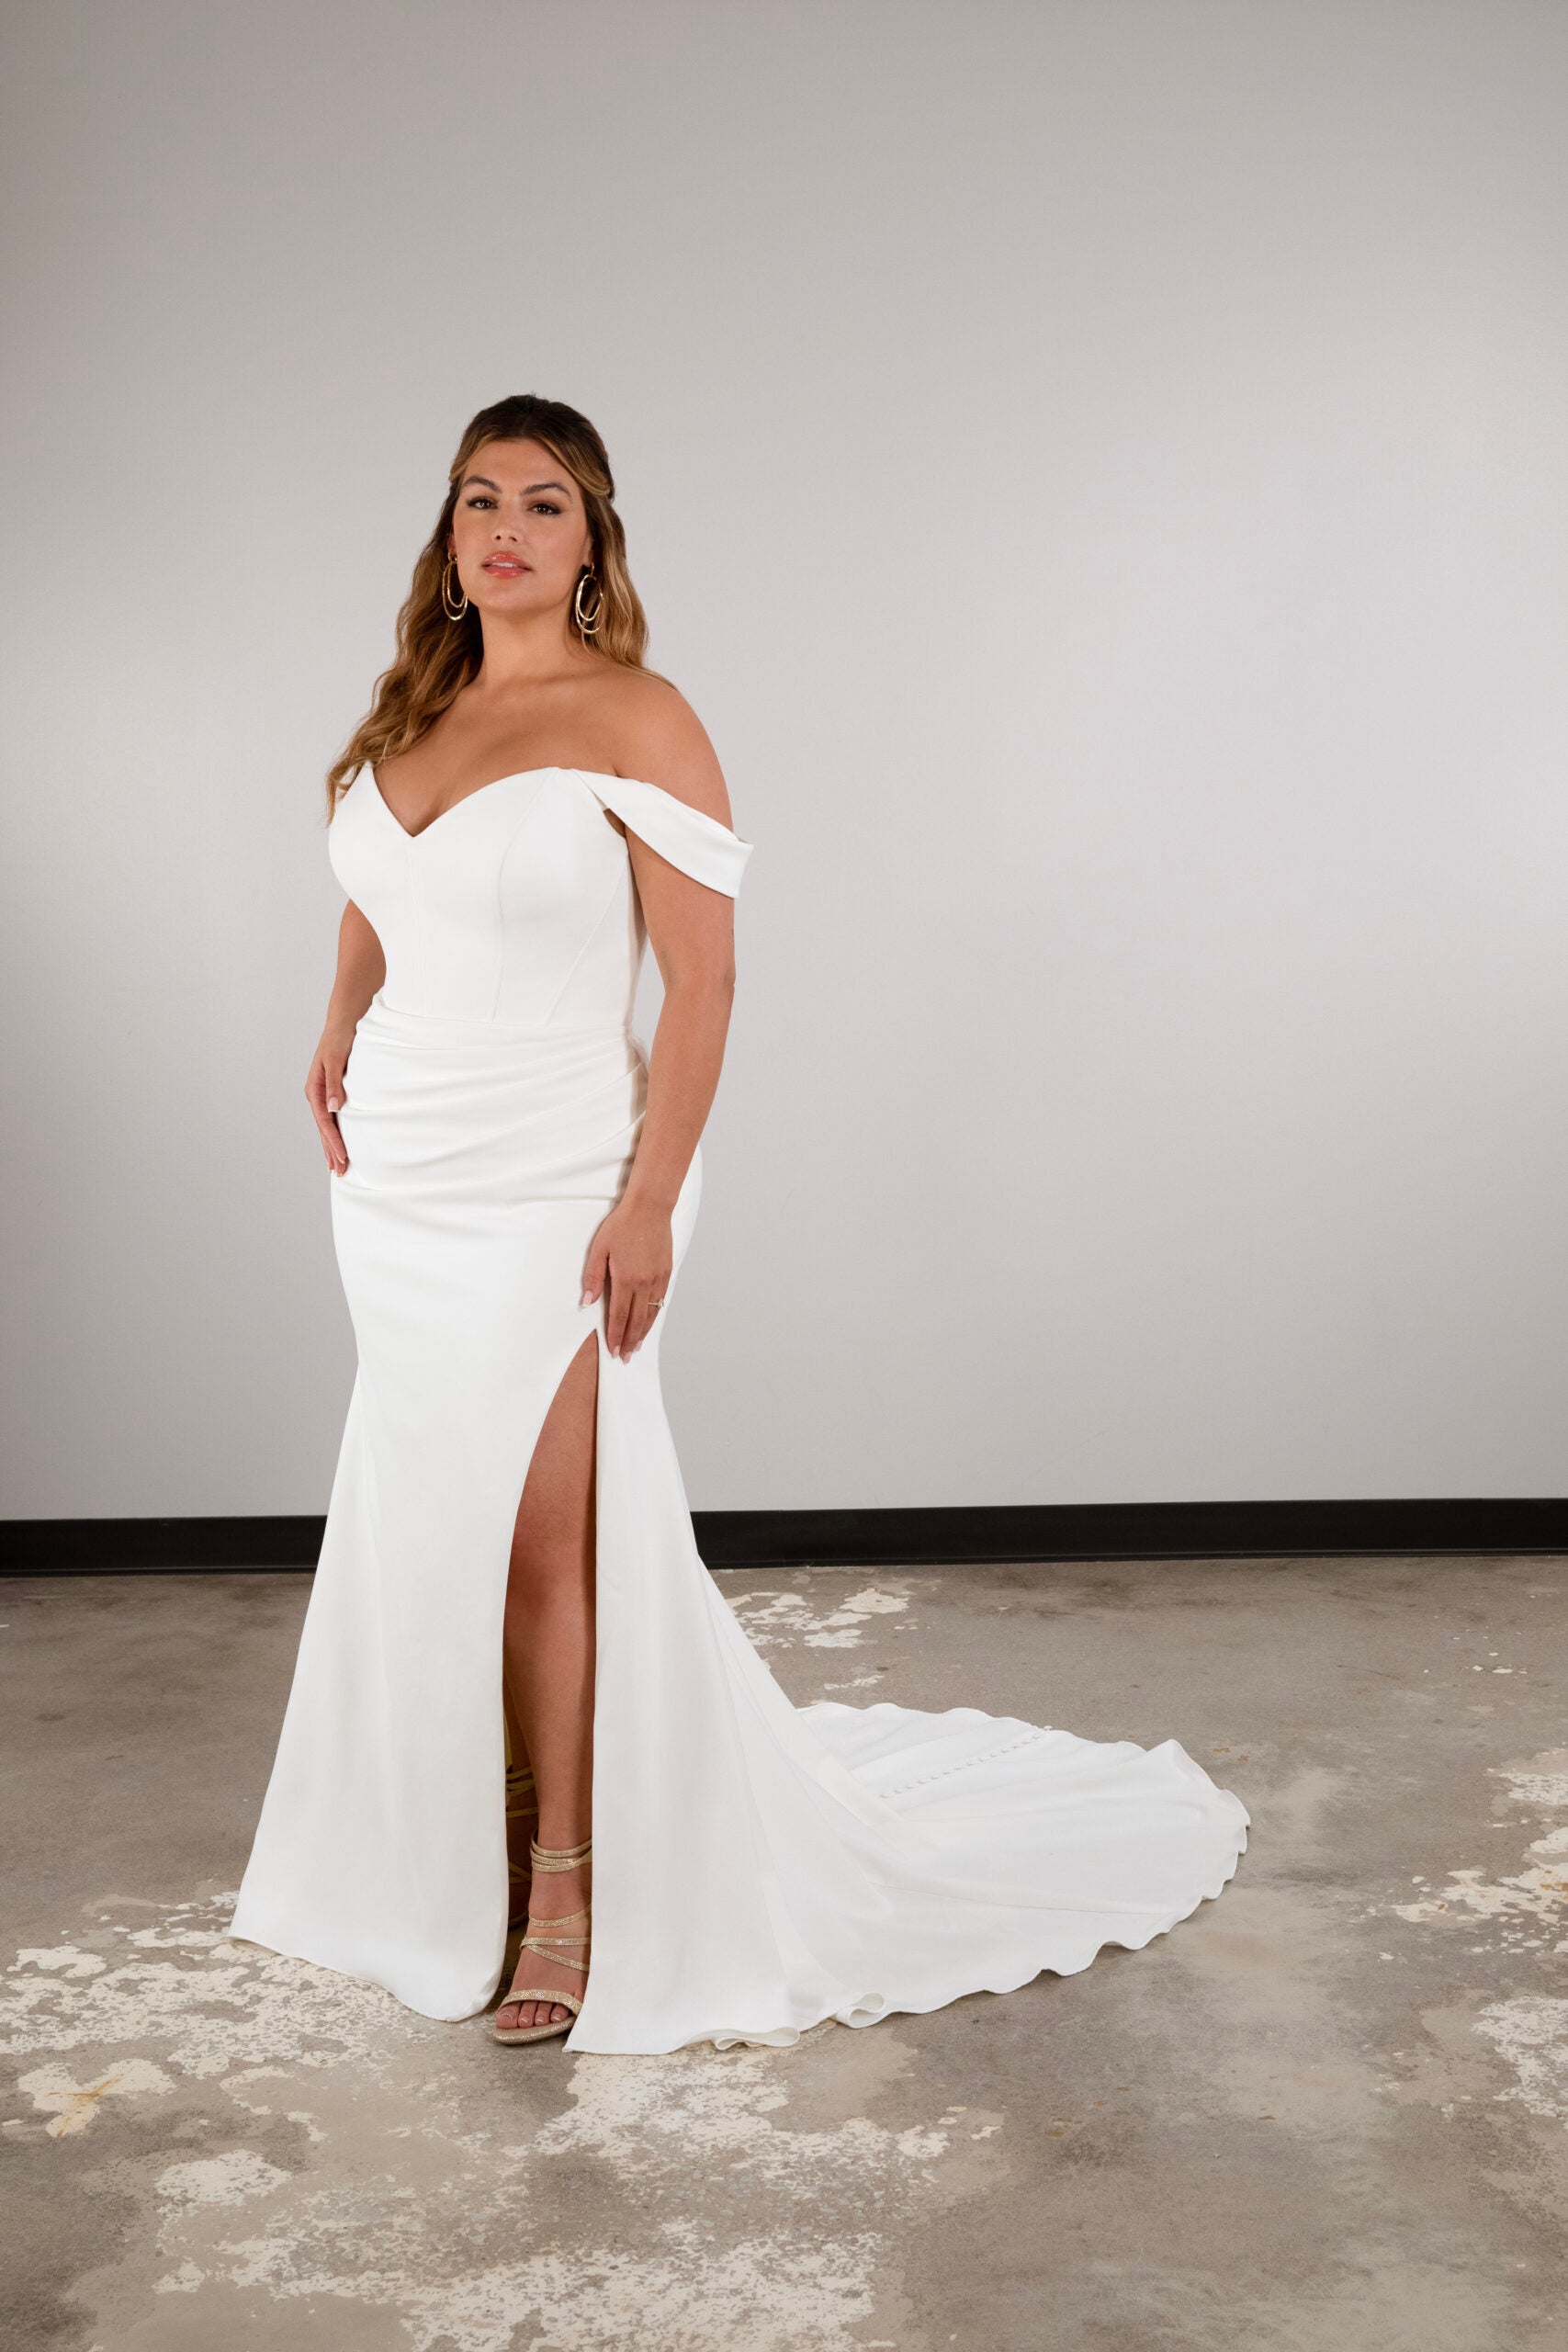 Simple Off-the-Shoulder Sheath Gown With Slit by Essense of Australia - Image 1